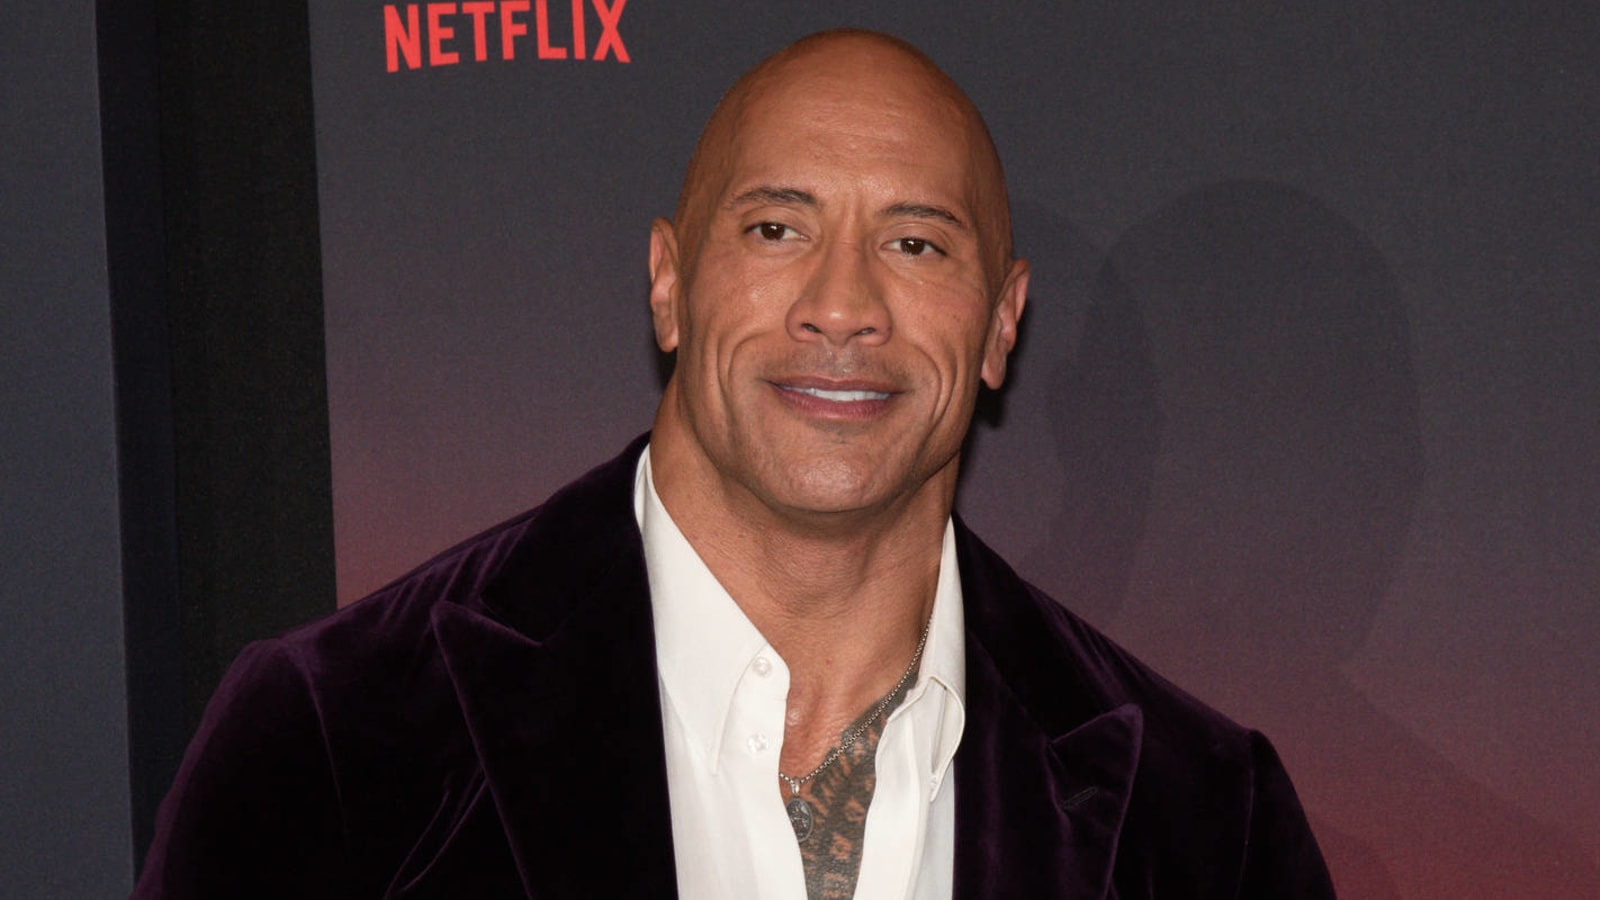 Dwayne Johnson sees Vin Diesel's public plea for him to return to 'Fast & Furious' as 'manipulation'